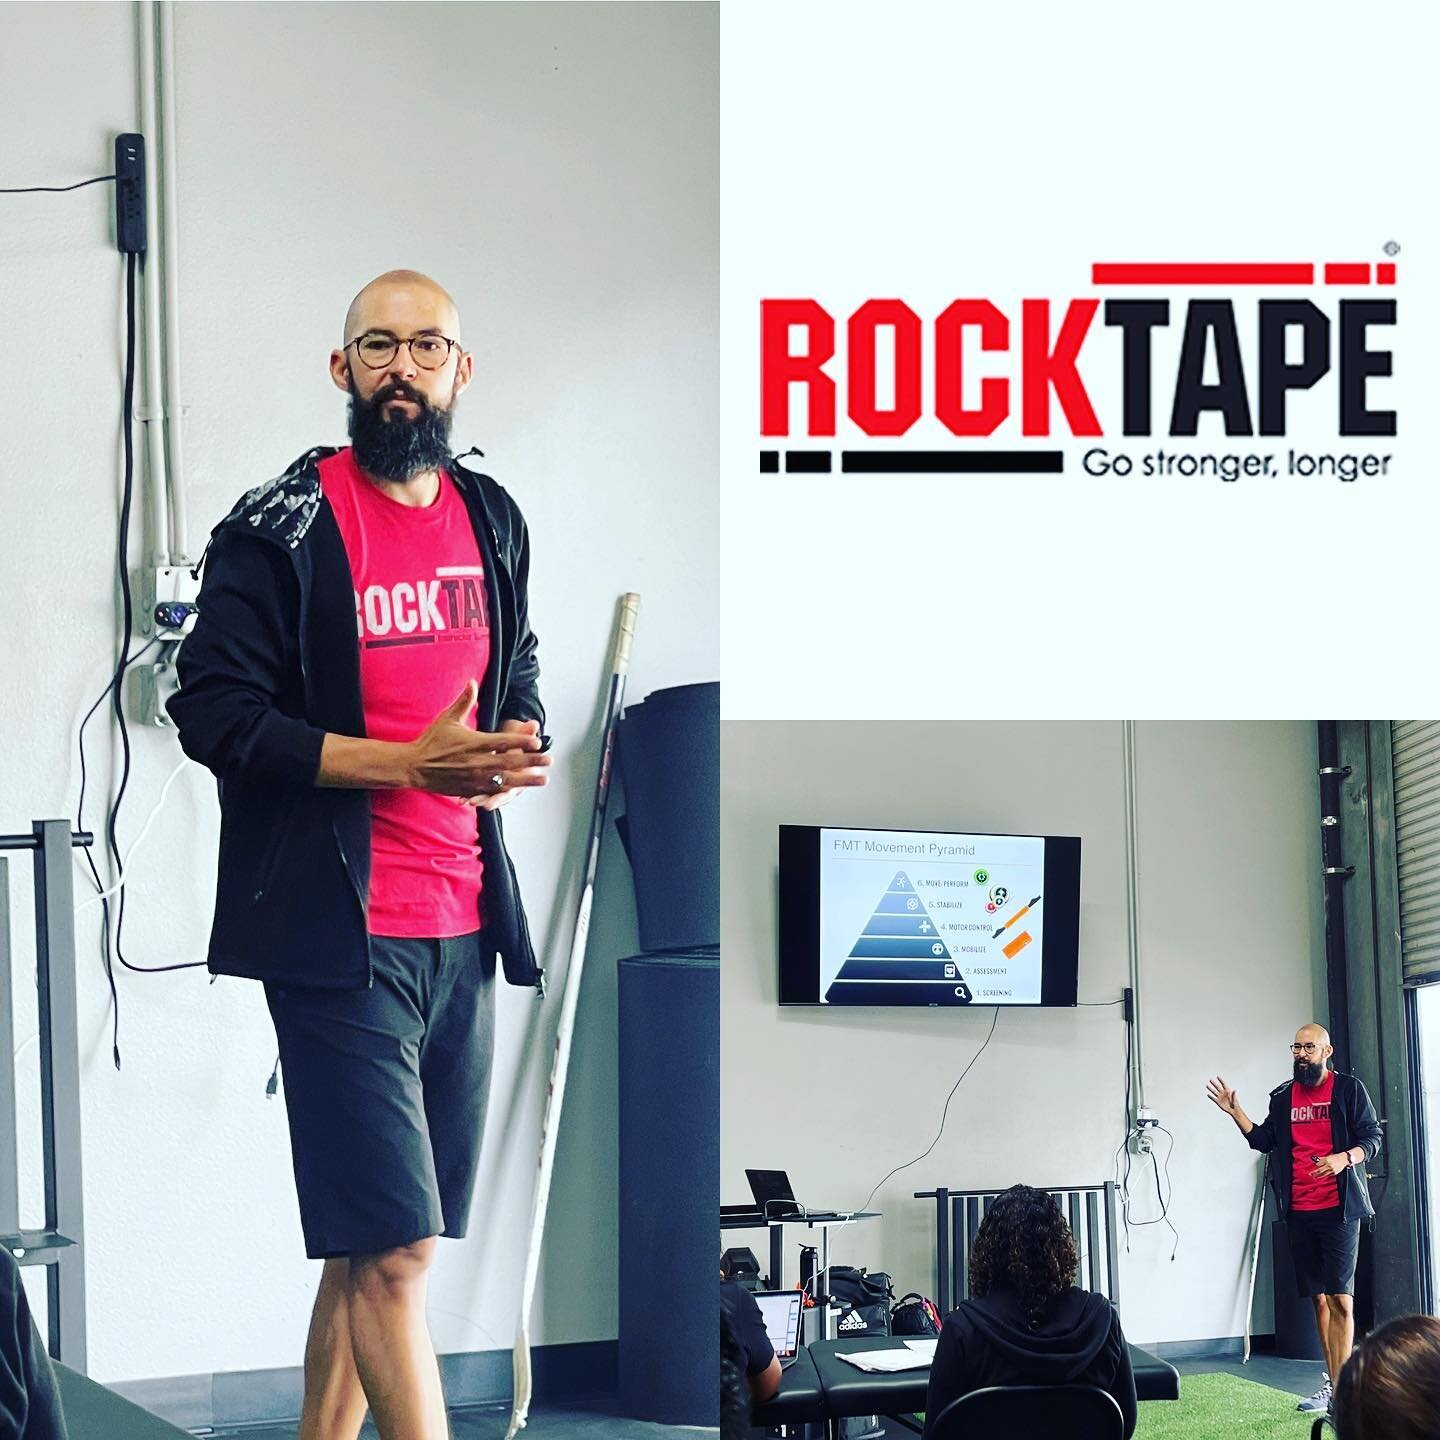 Another great @rocktape class with @drcarlosrphysio &ldquo;Learn continually-There&rsquo;s always one more thing to learn&rdquo;&hellip;Steve Jobs. @podium_sports_performance @drseangateley @coach.ezq @tony.cortes @drjoejaime #podiumsportsperformance